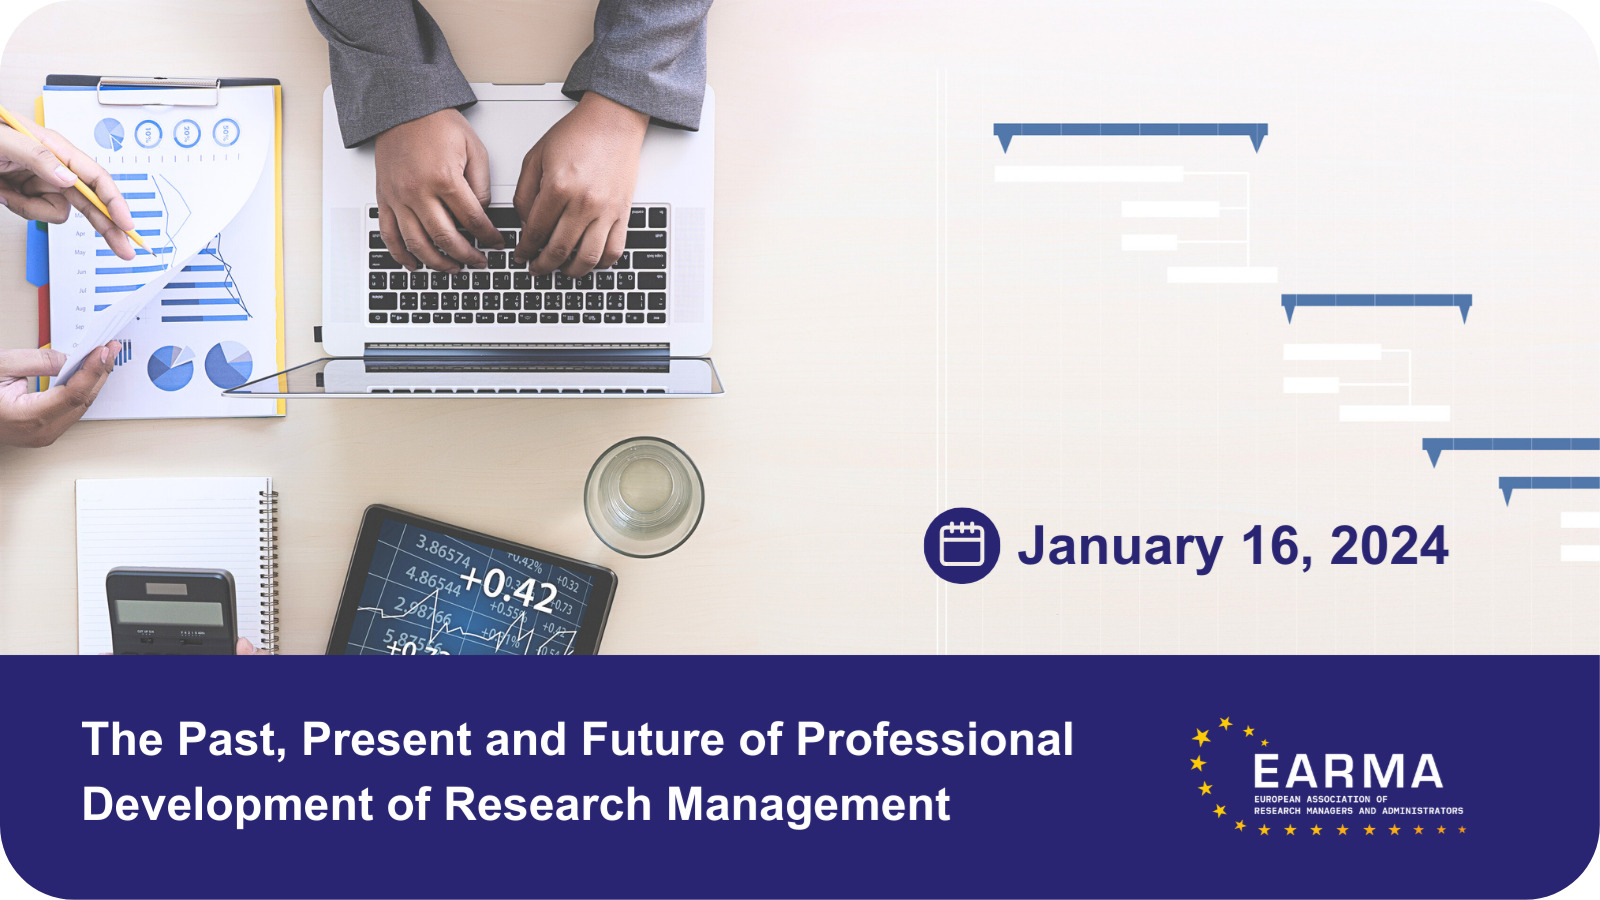 round the past the present and future of professional development of research manager